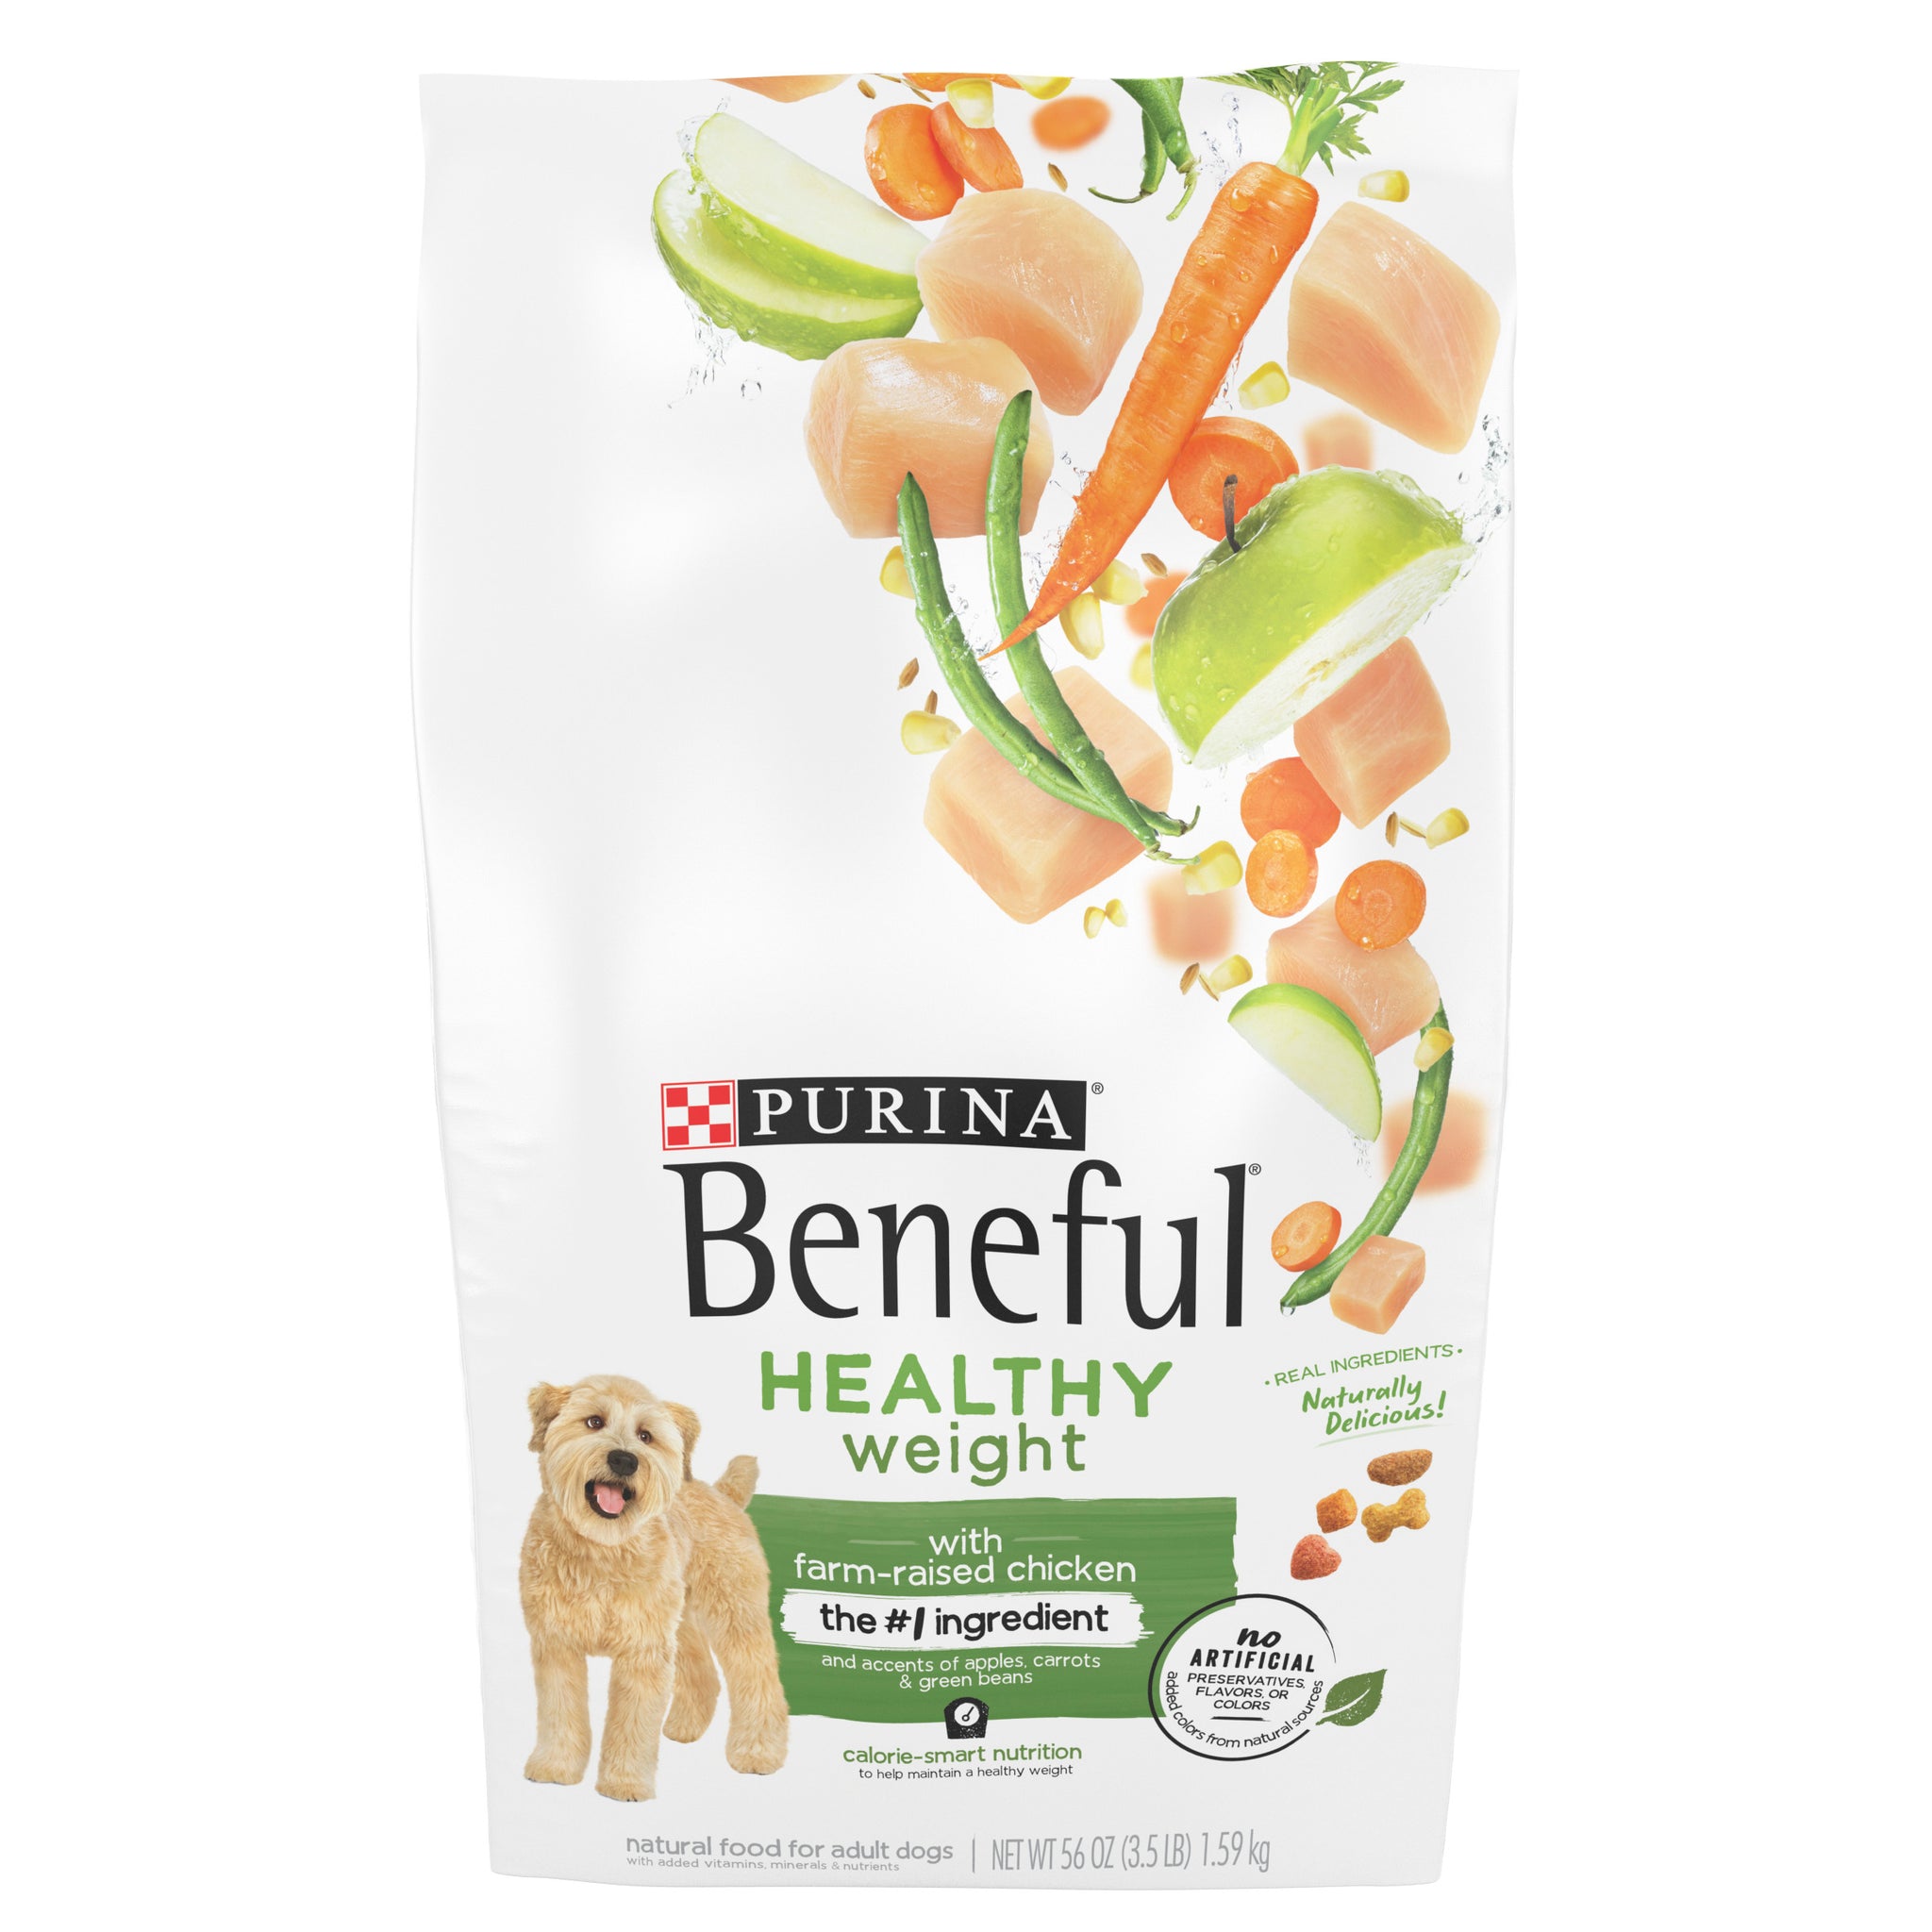 PURINA BENEFUL DRY DOG FOOD WITH REAL CHICKEN SMALL DOGS 3.5LBS - PBDC35